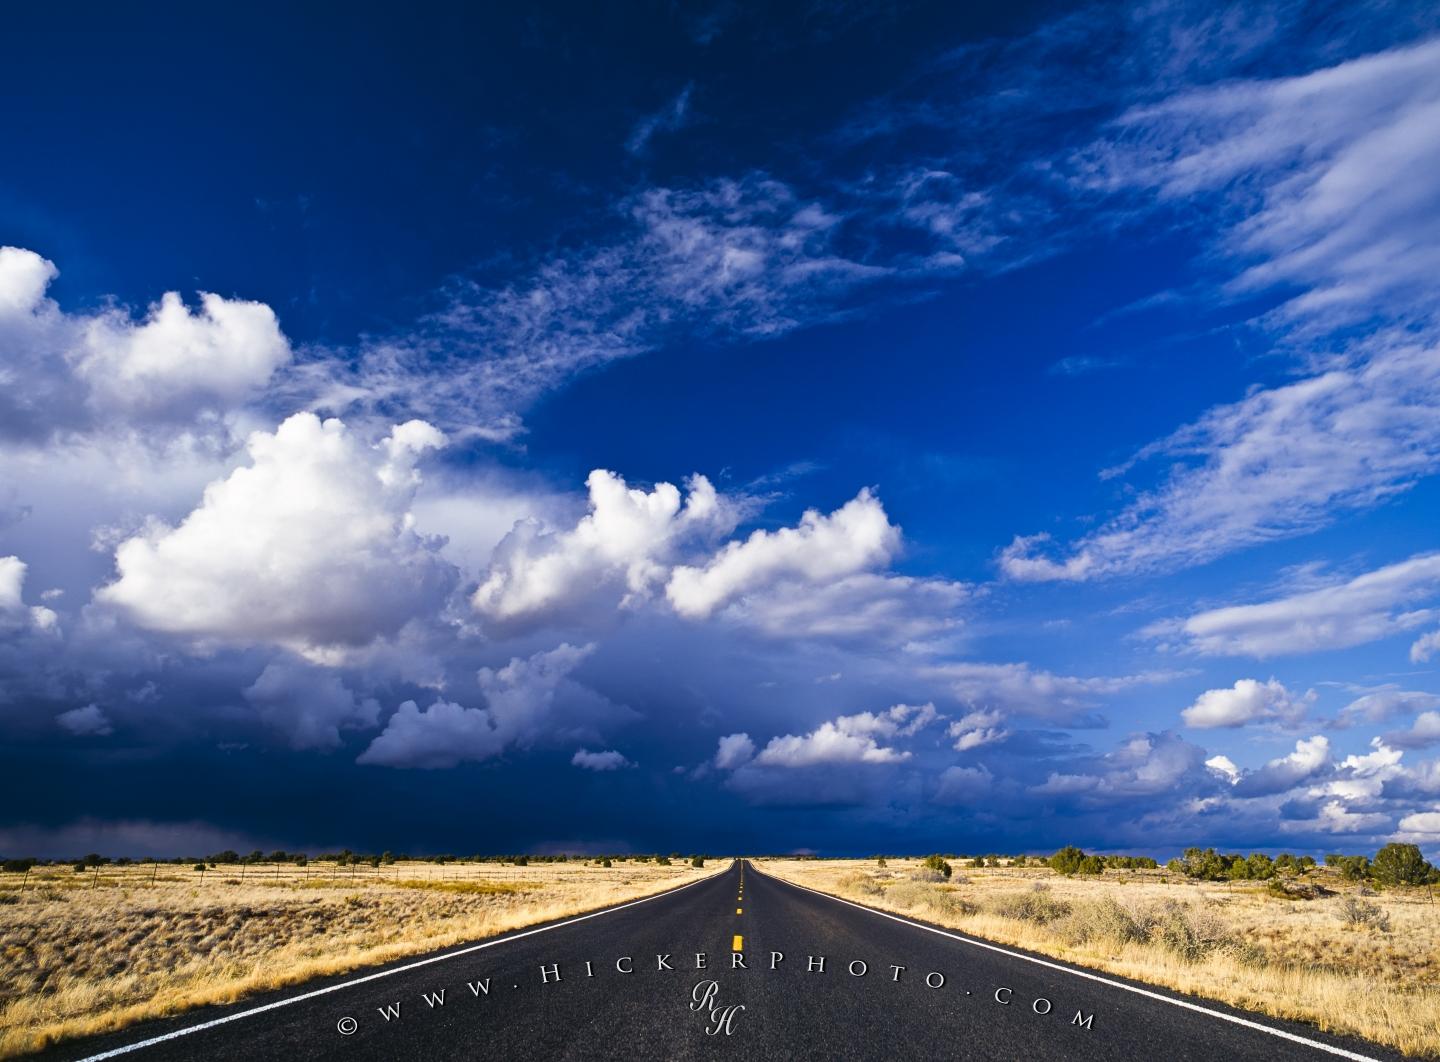 Wallpaper Background Endless Desert Road Storm Clouds New Mexico